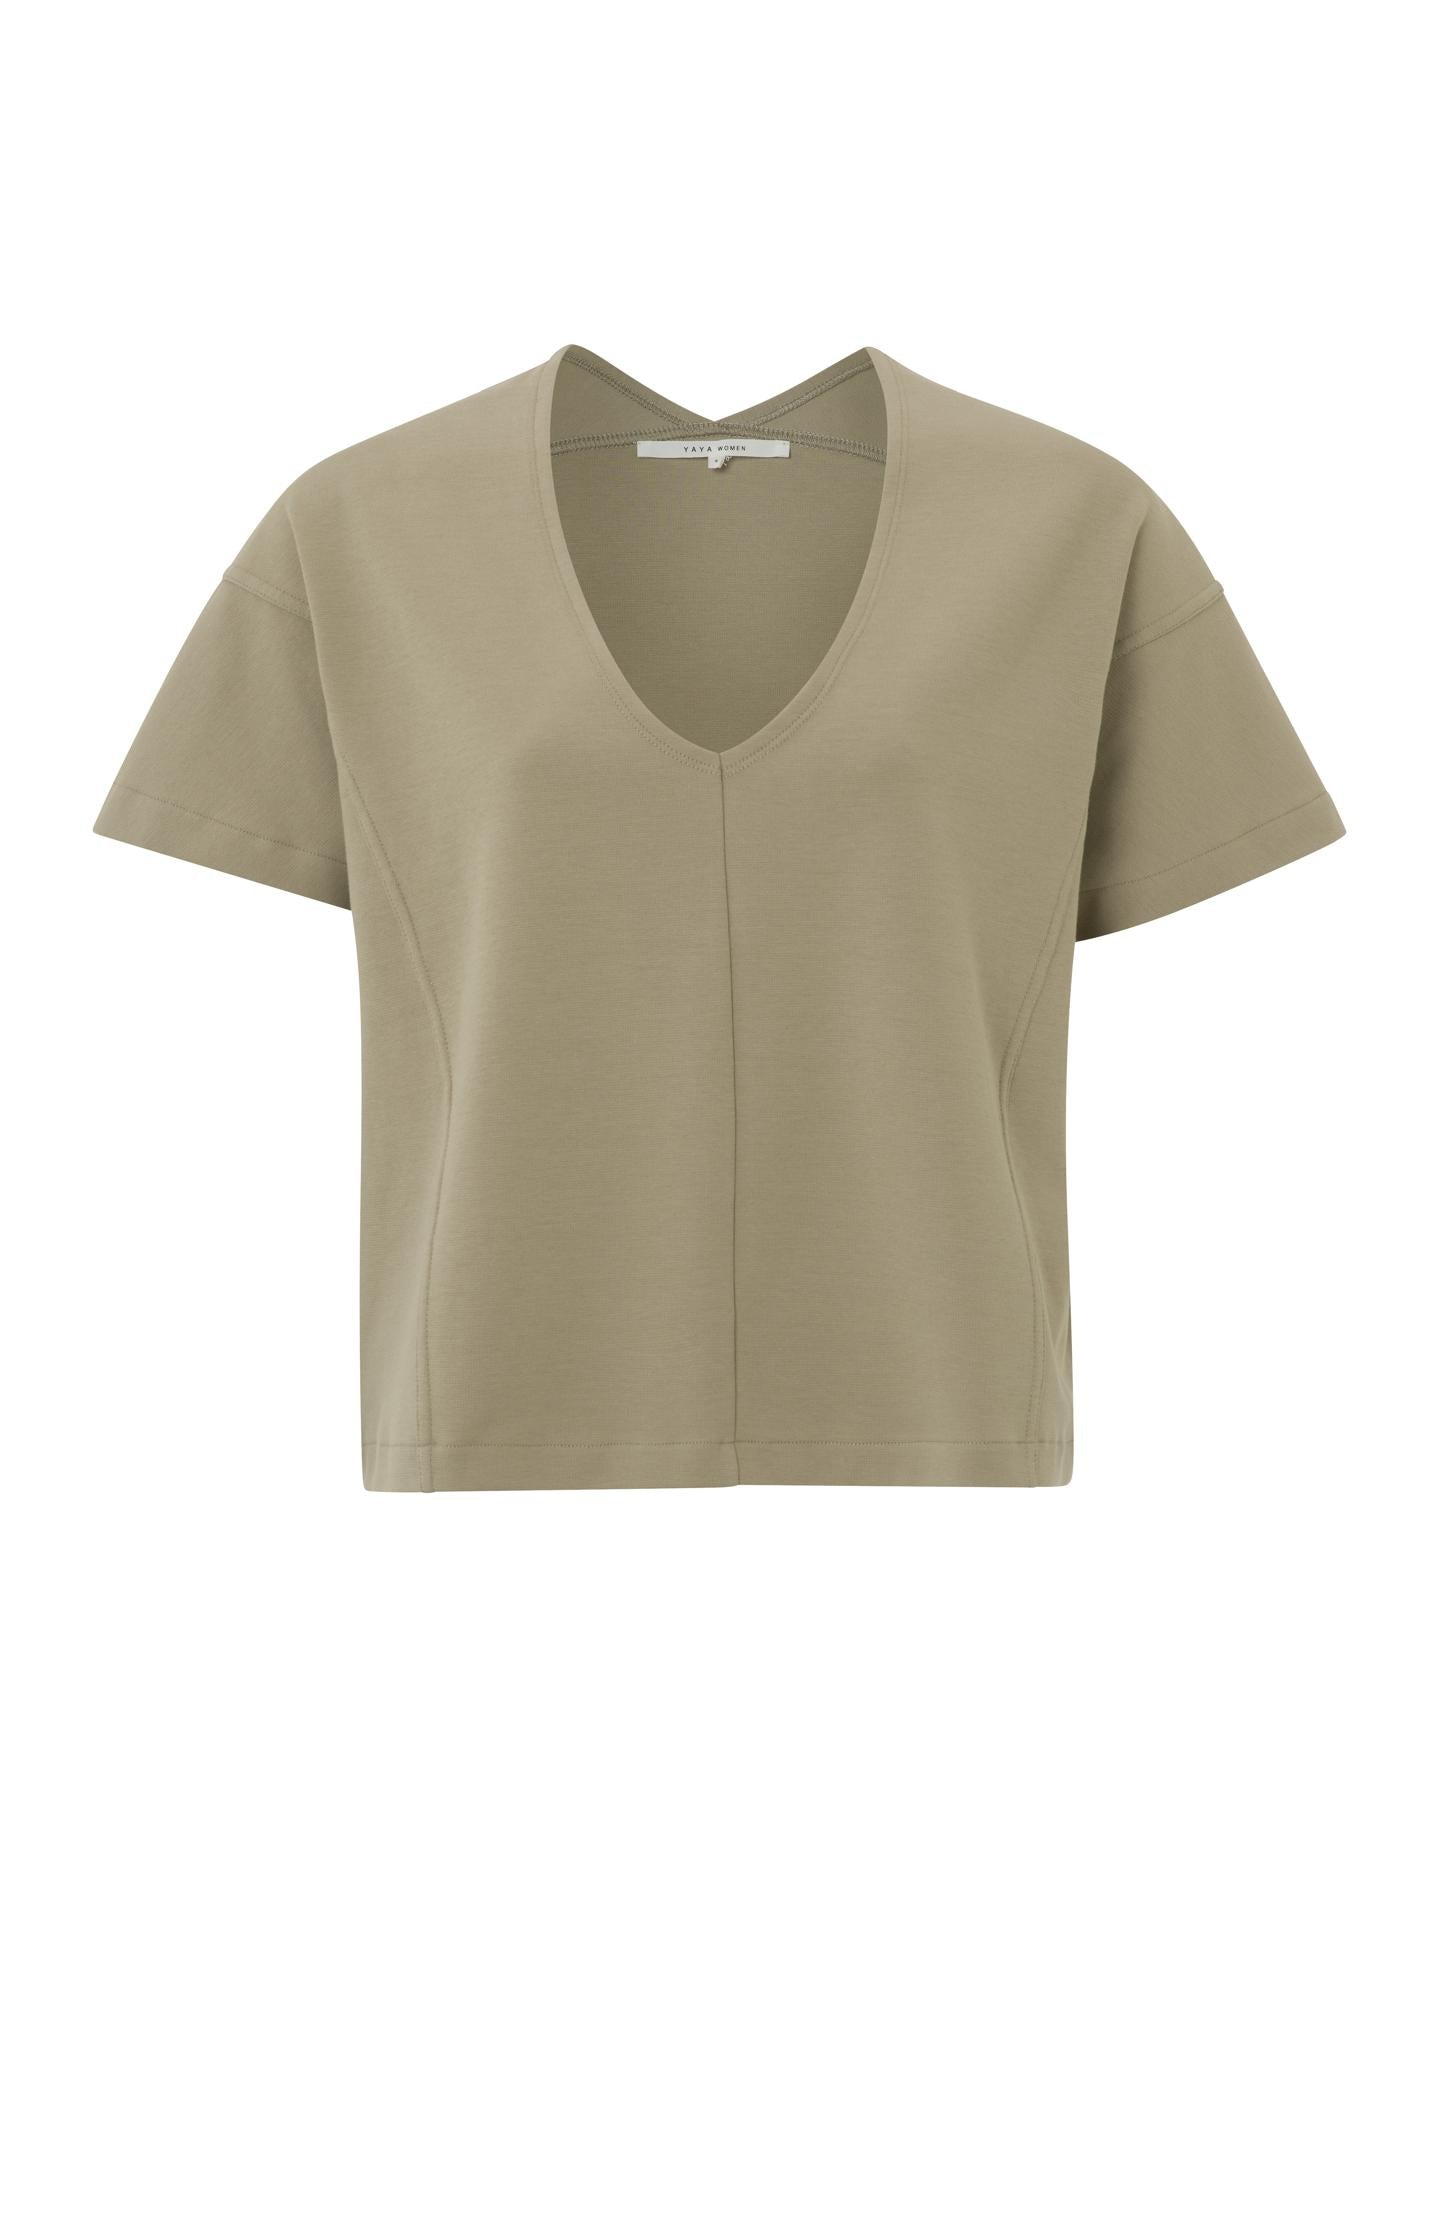 T-shirt with V-neck, short sleeves and seam details - Type: product